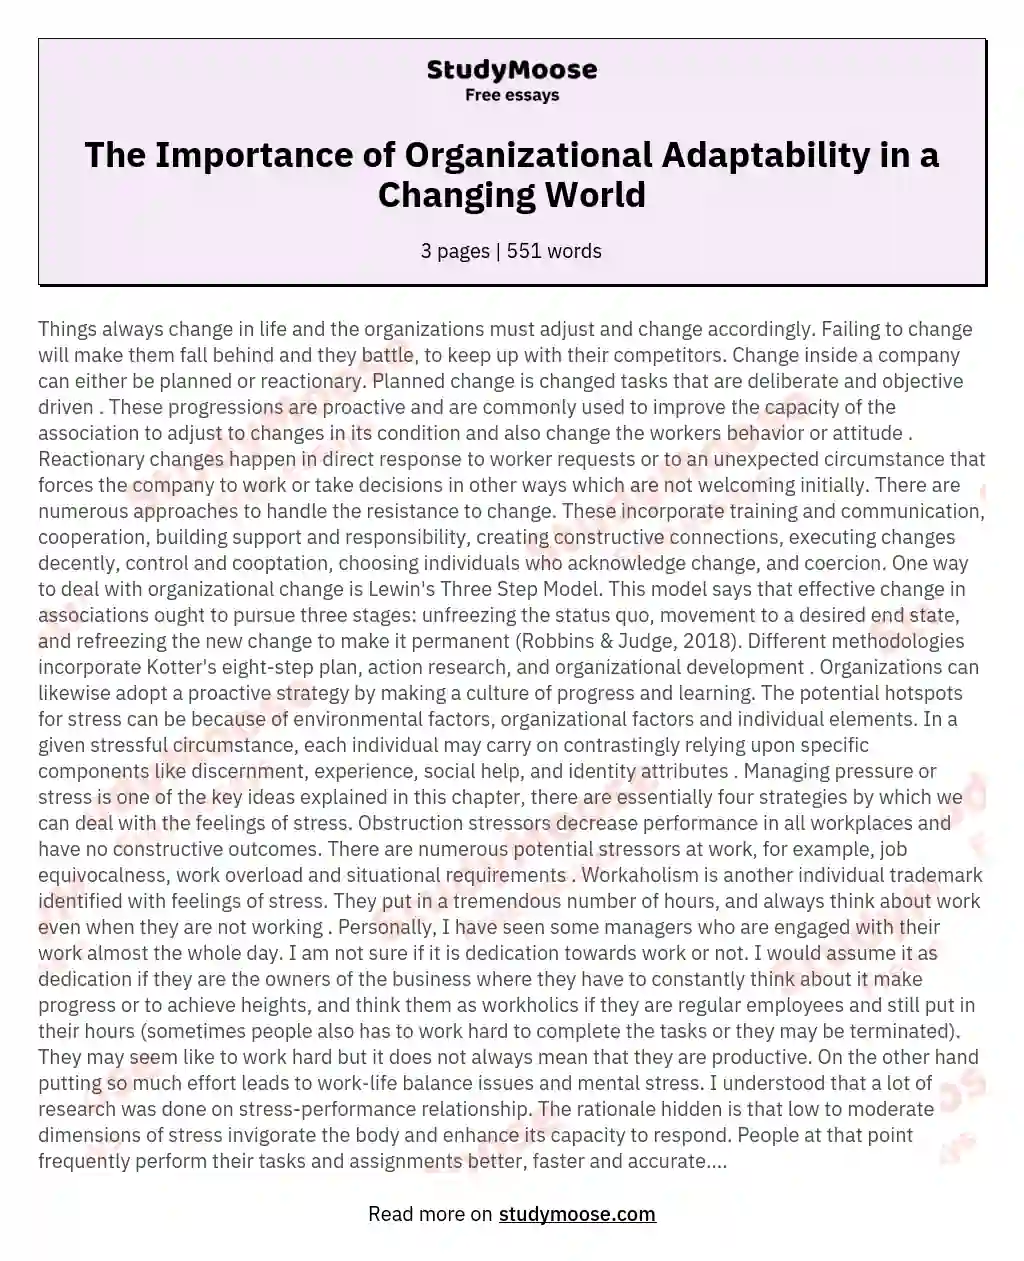 The Importance of Organizational Adaptability in a Changing World essay